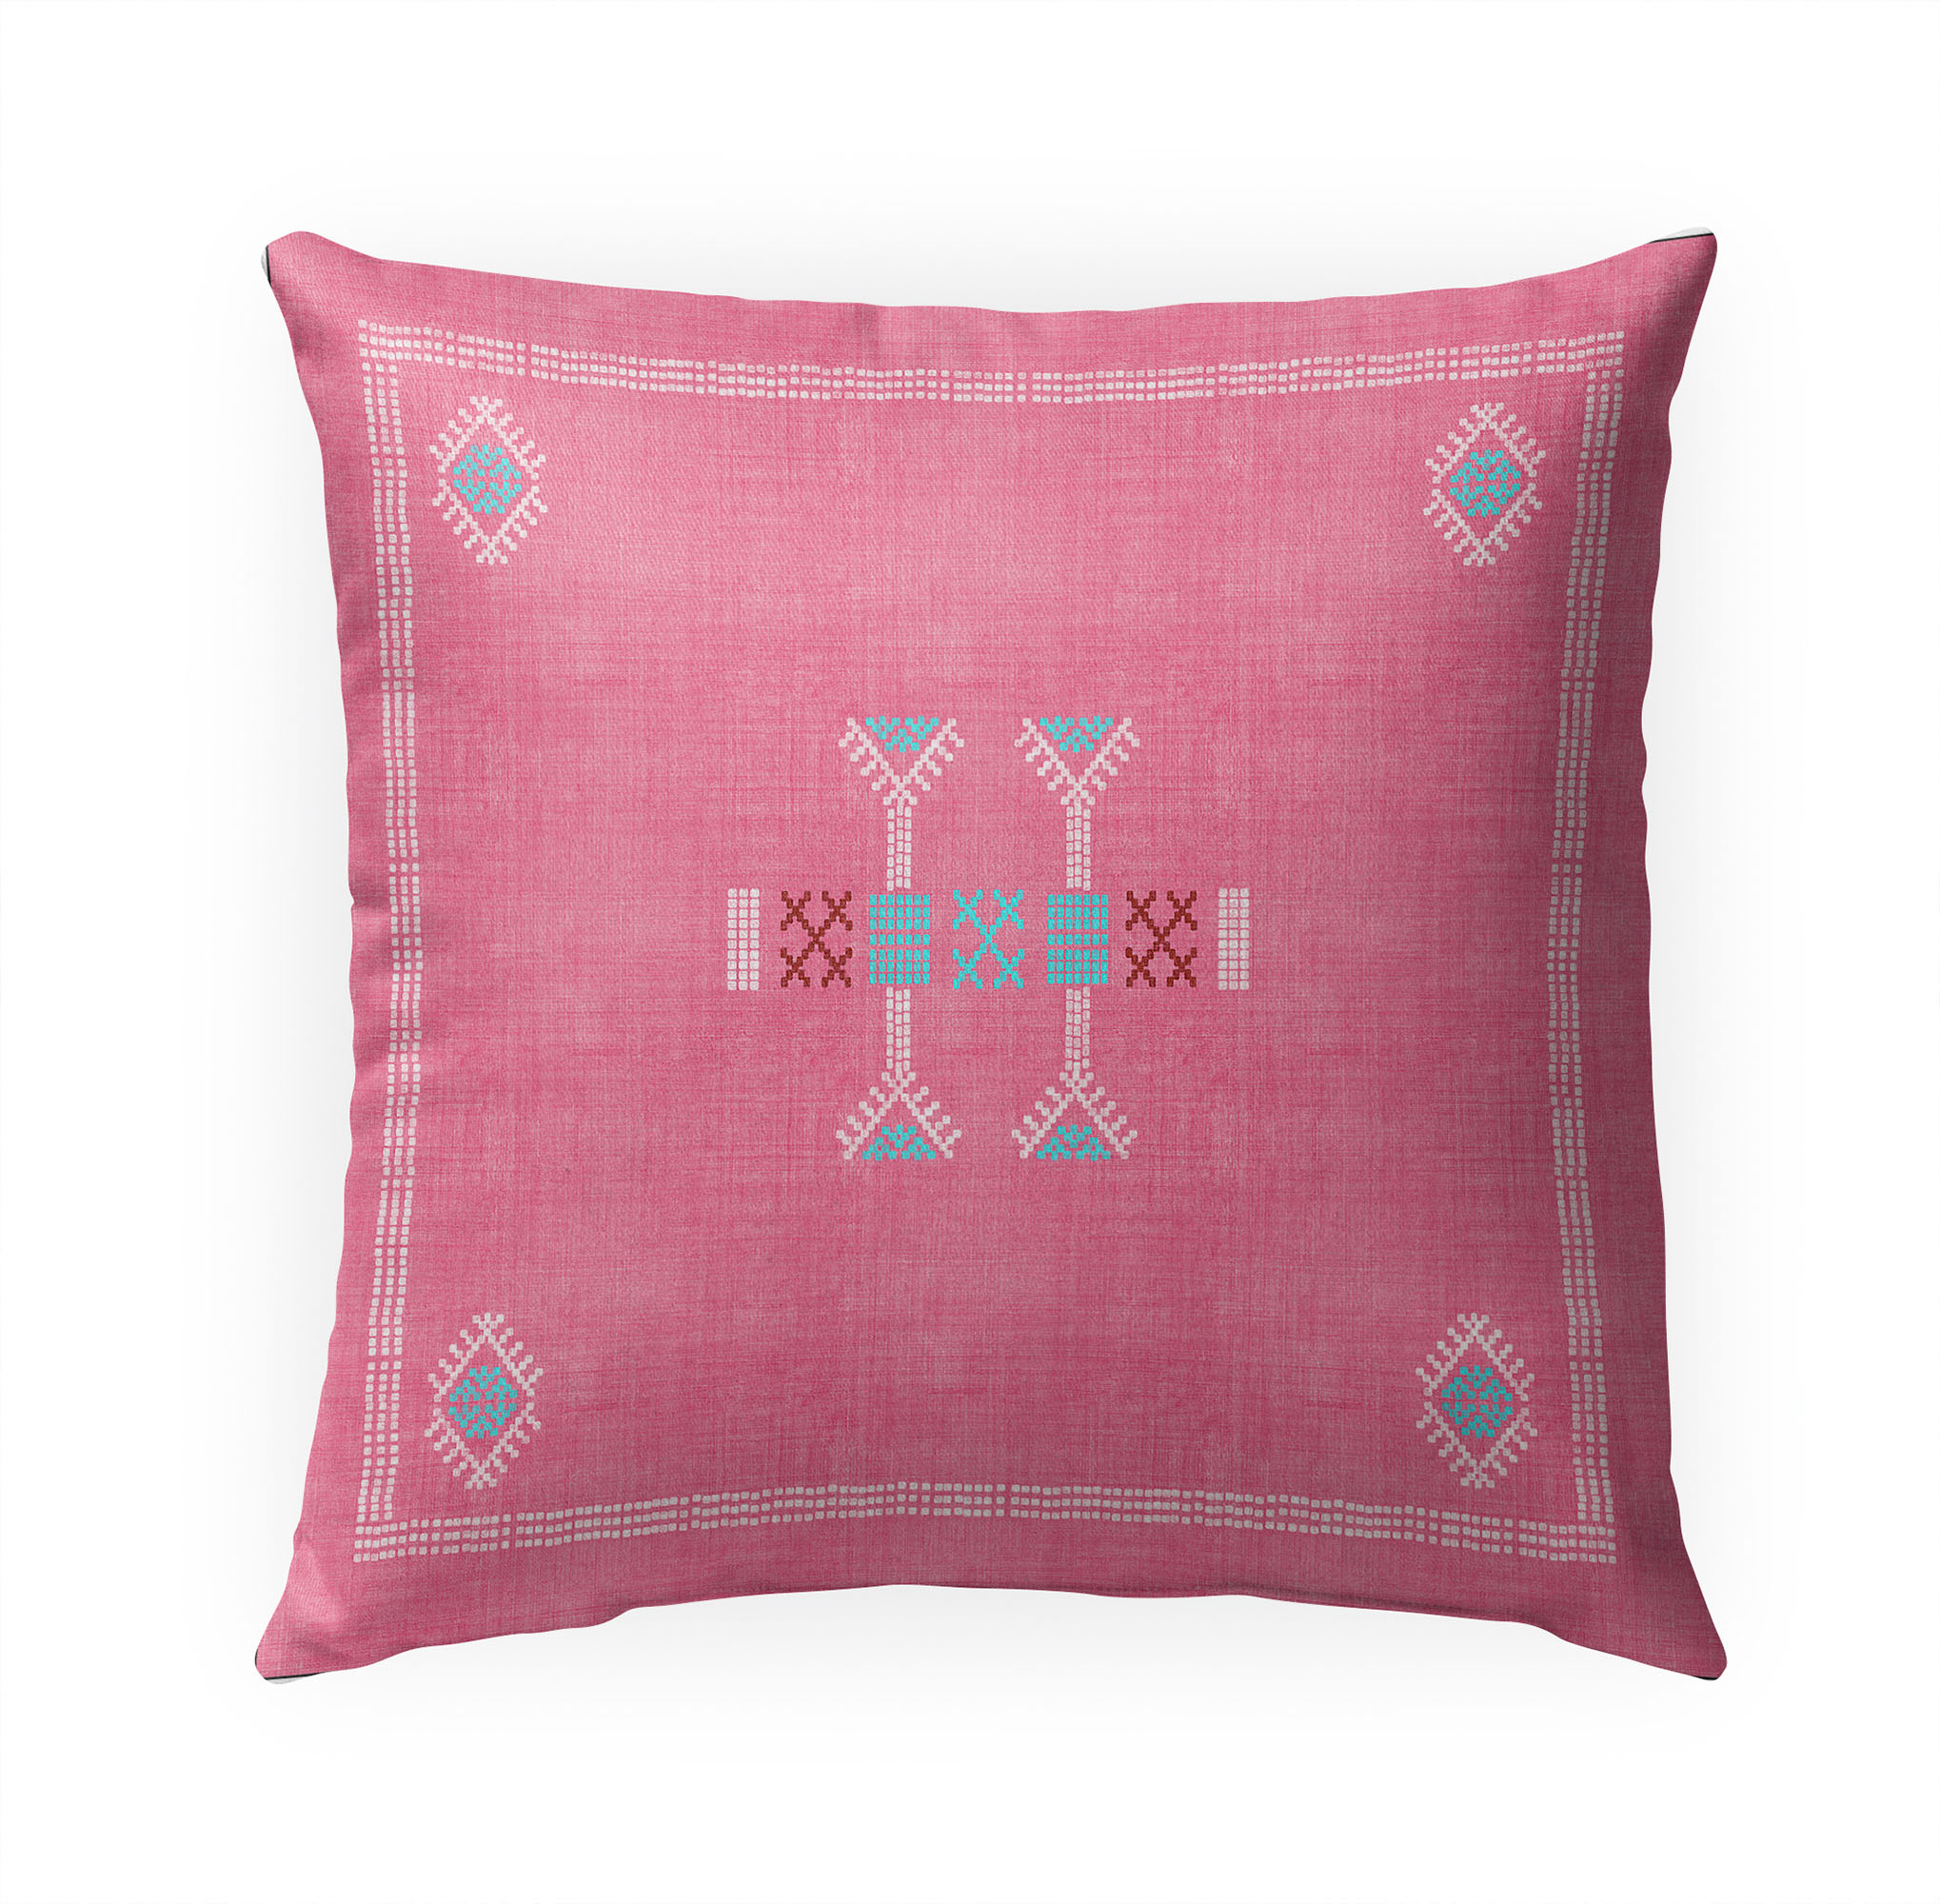 Moroccan Kilim Pink Outdoor Pillow by Kavka Designs - image 1 of 5